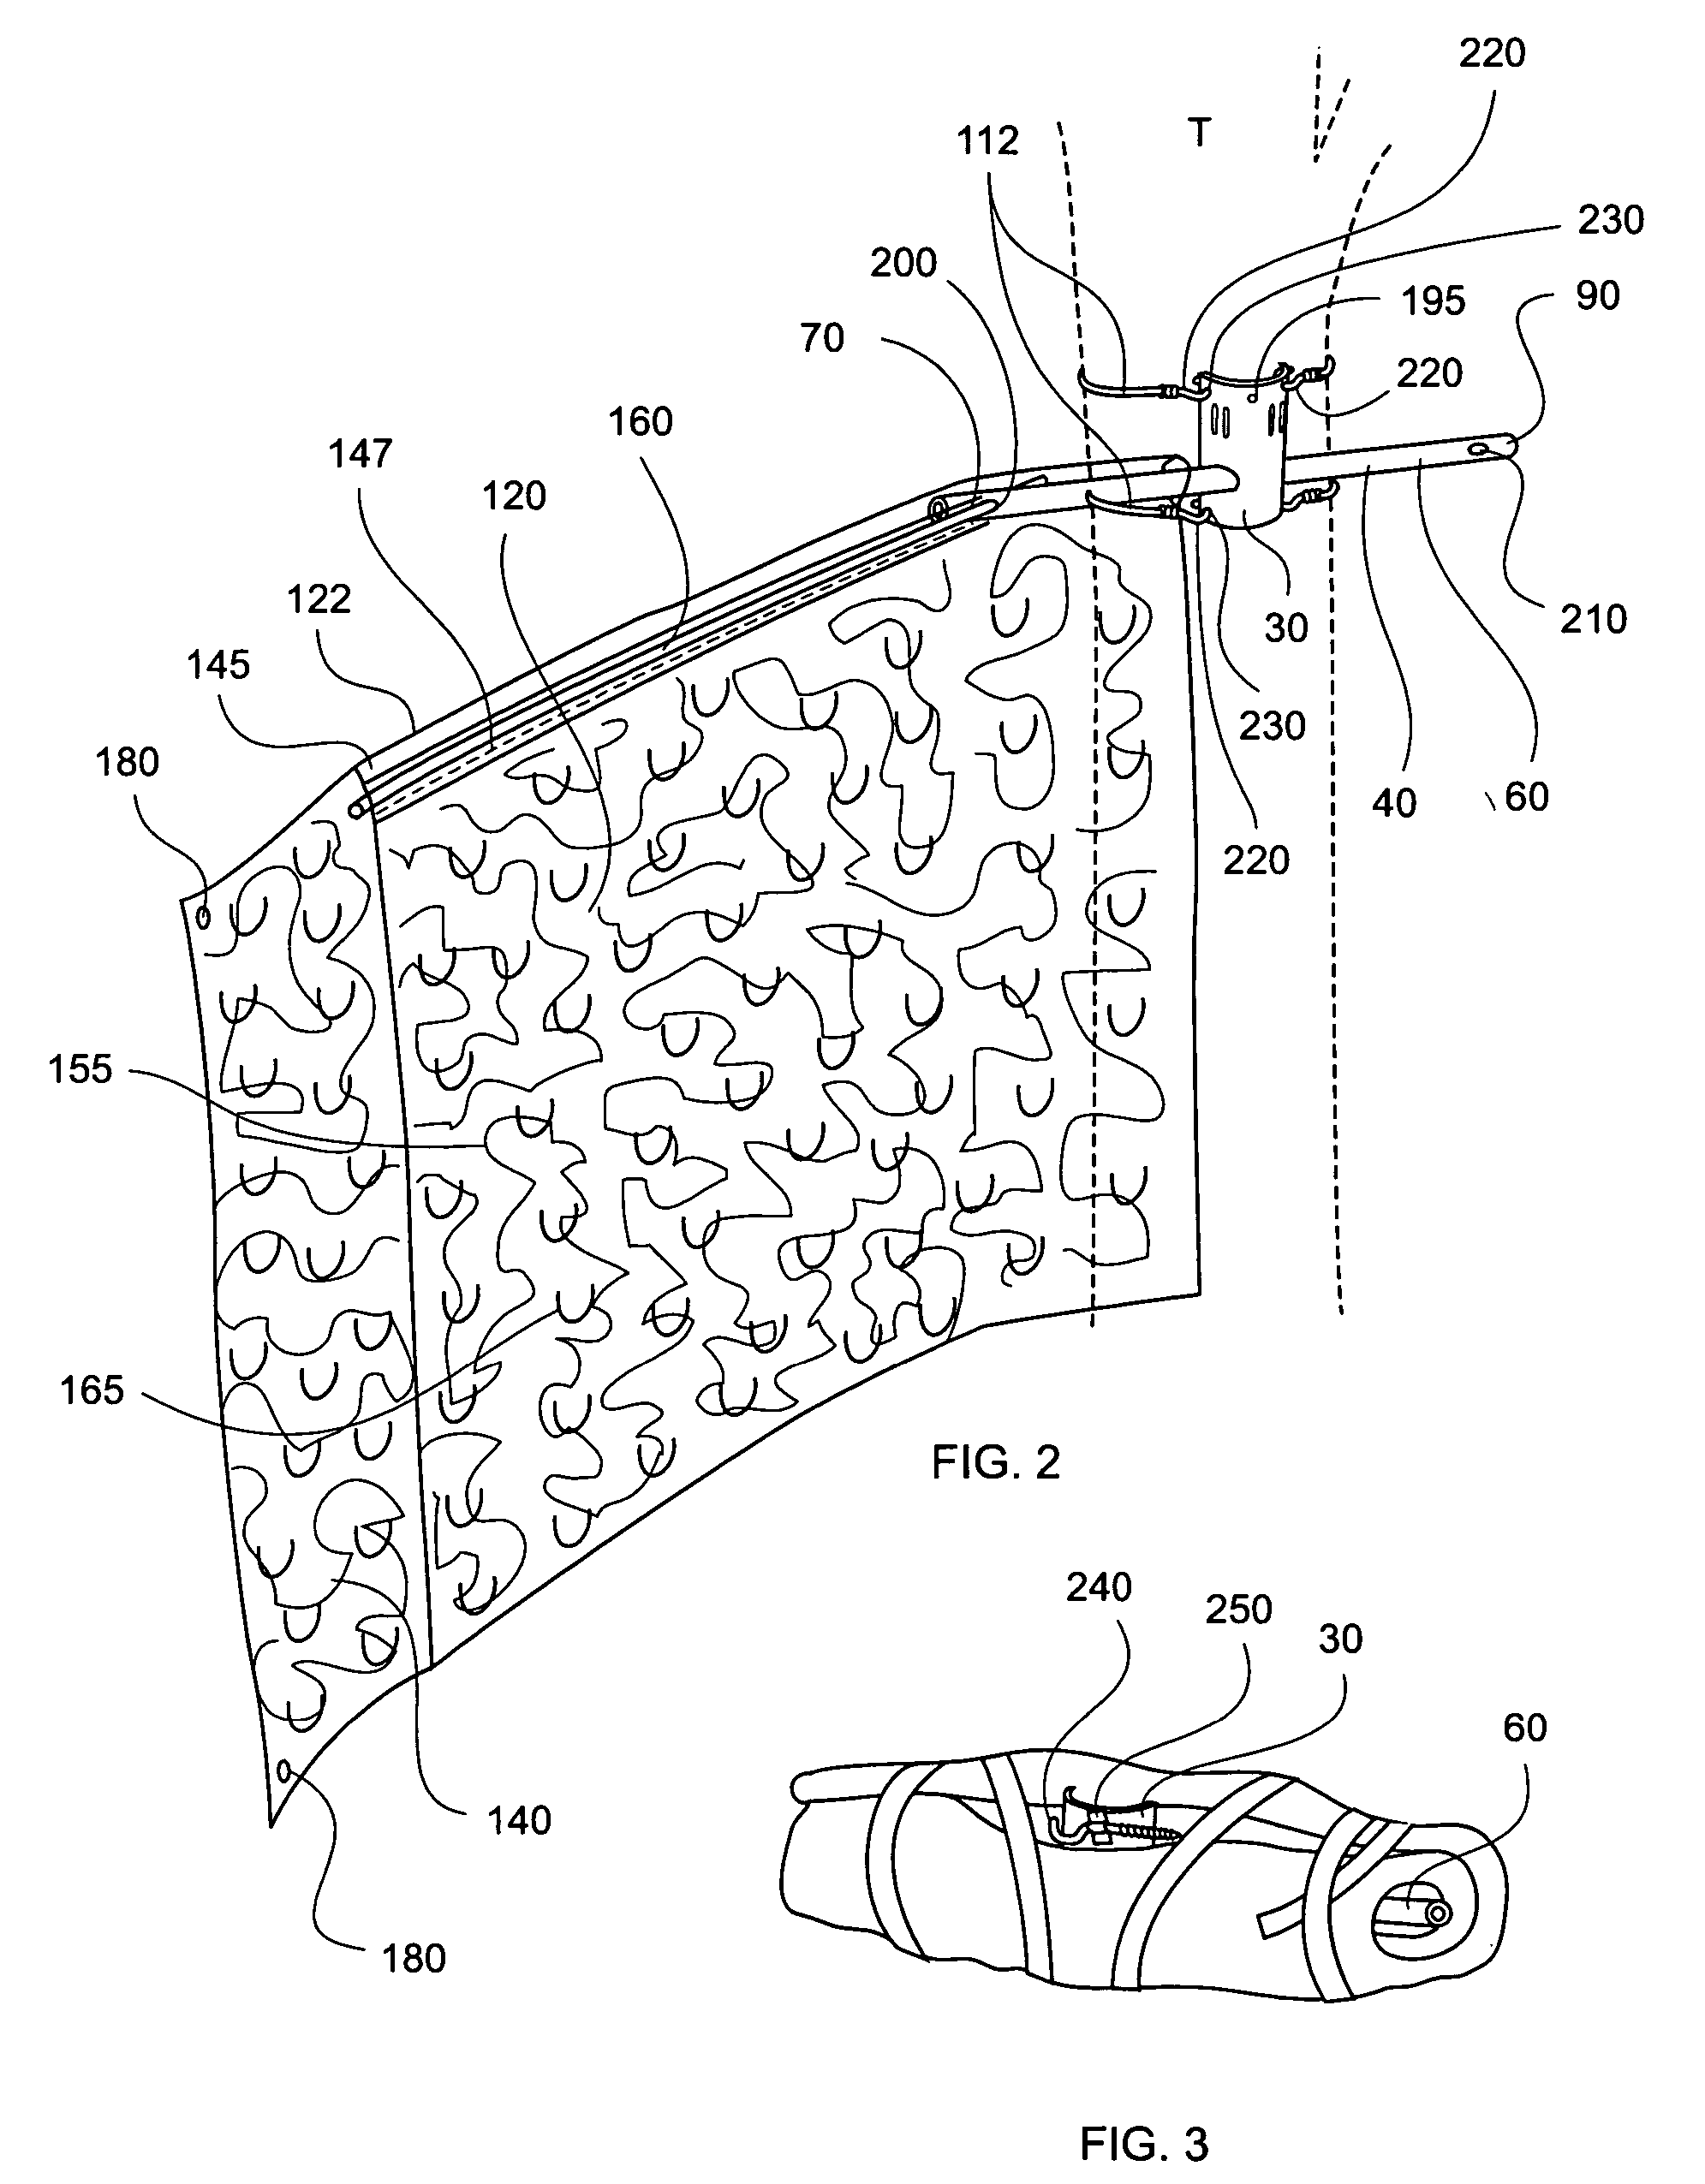 Hunting blind and method of use thereof